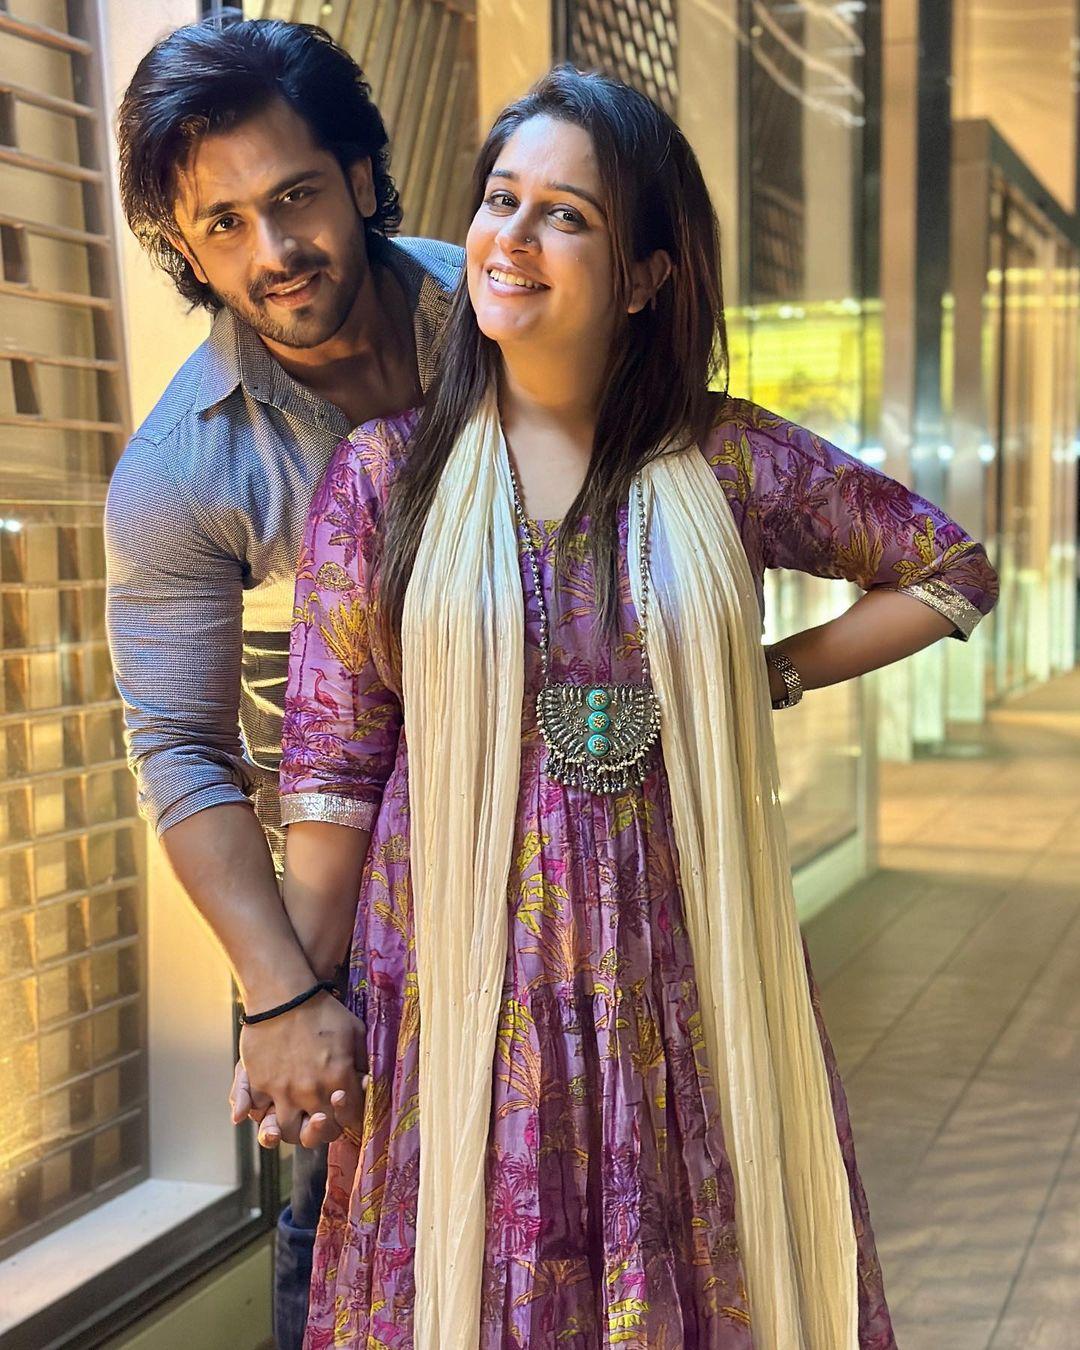 Dipika kakar and Shoiab Ibrahim met on the sets of ‘Sasural Simar Ka’. According to what they have told, the couple fell in love and realised it post-Shoaib's exit from the show